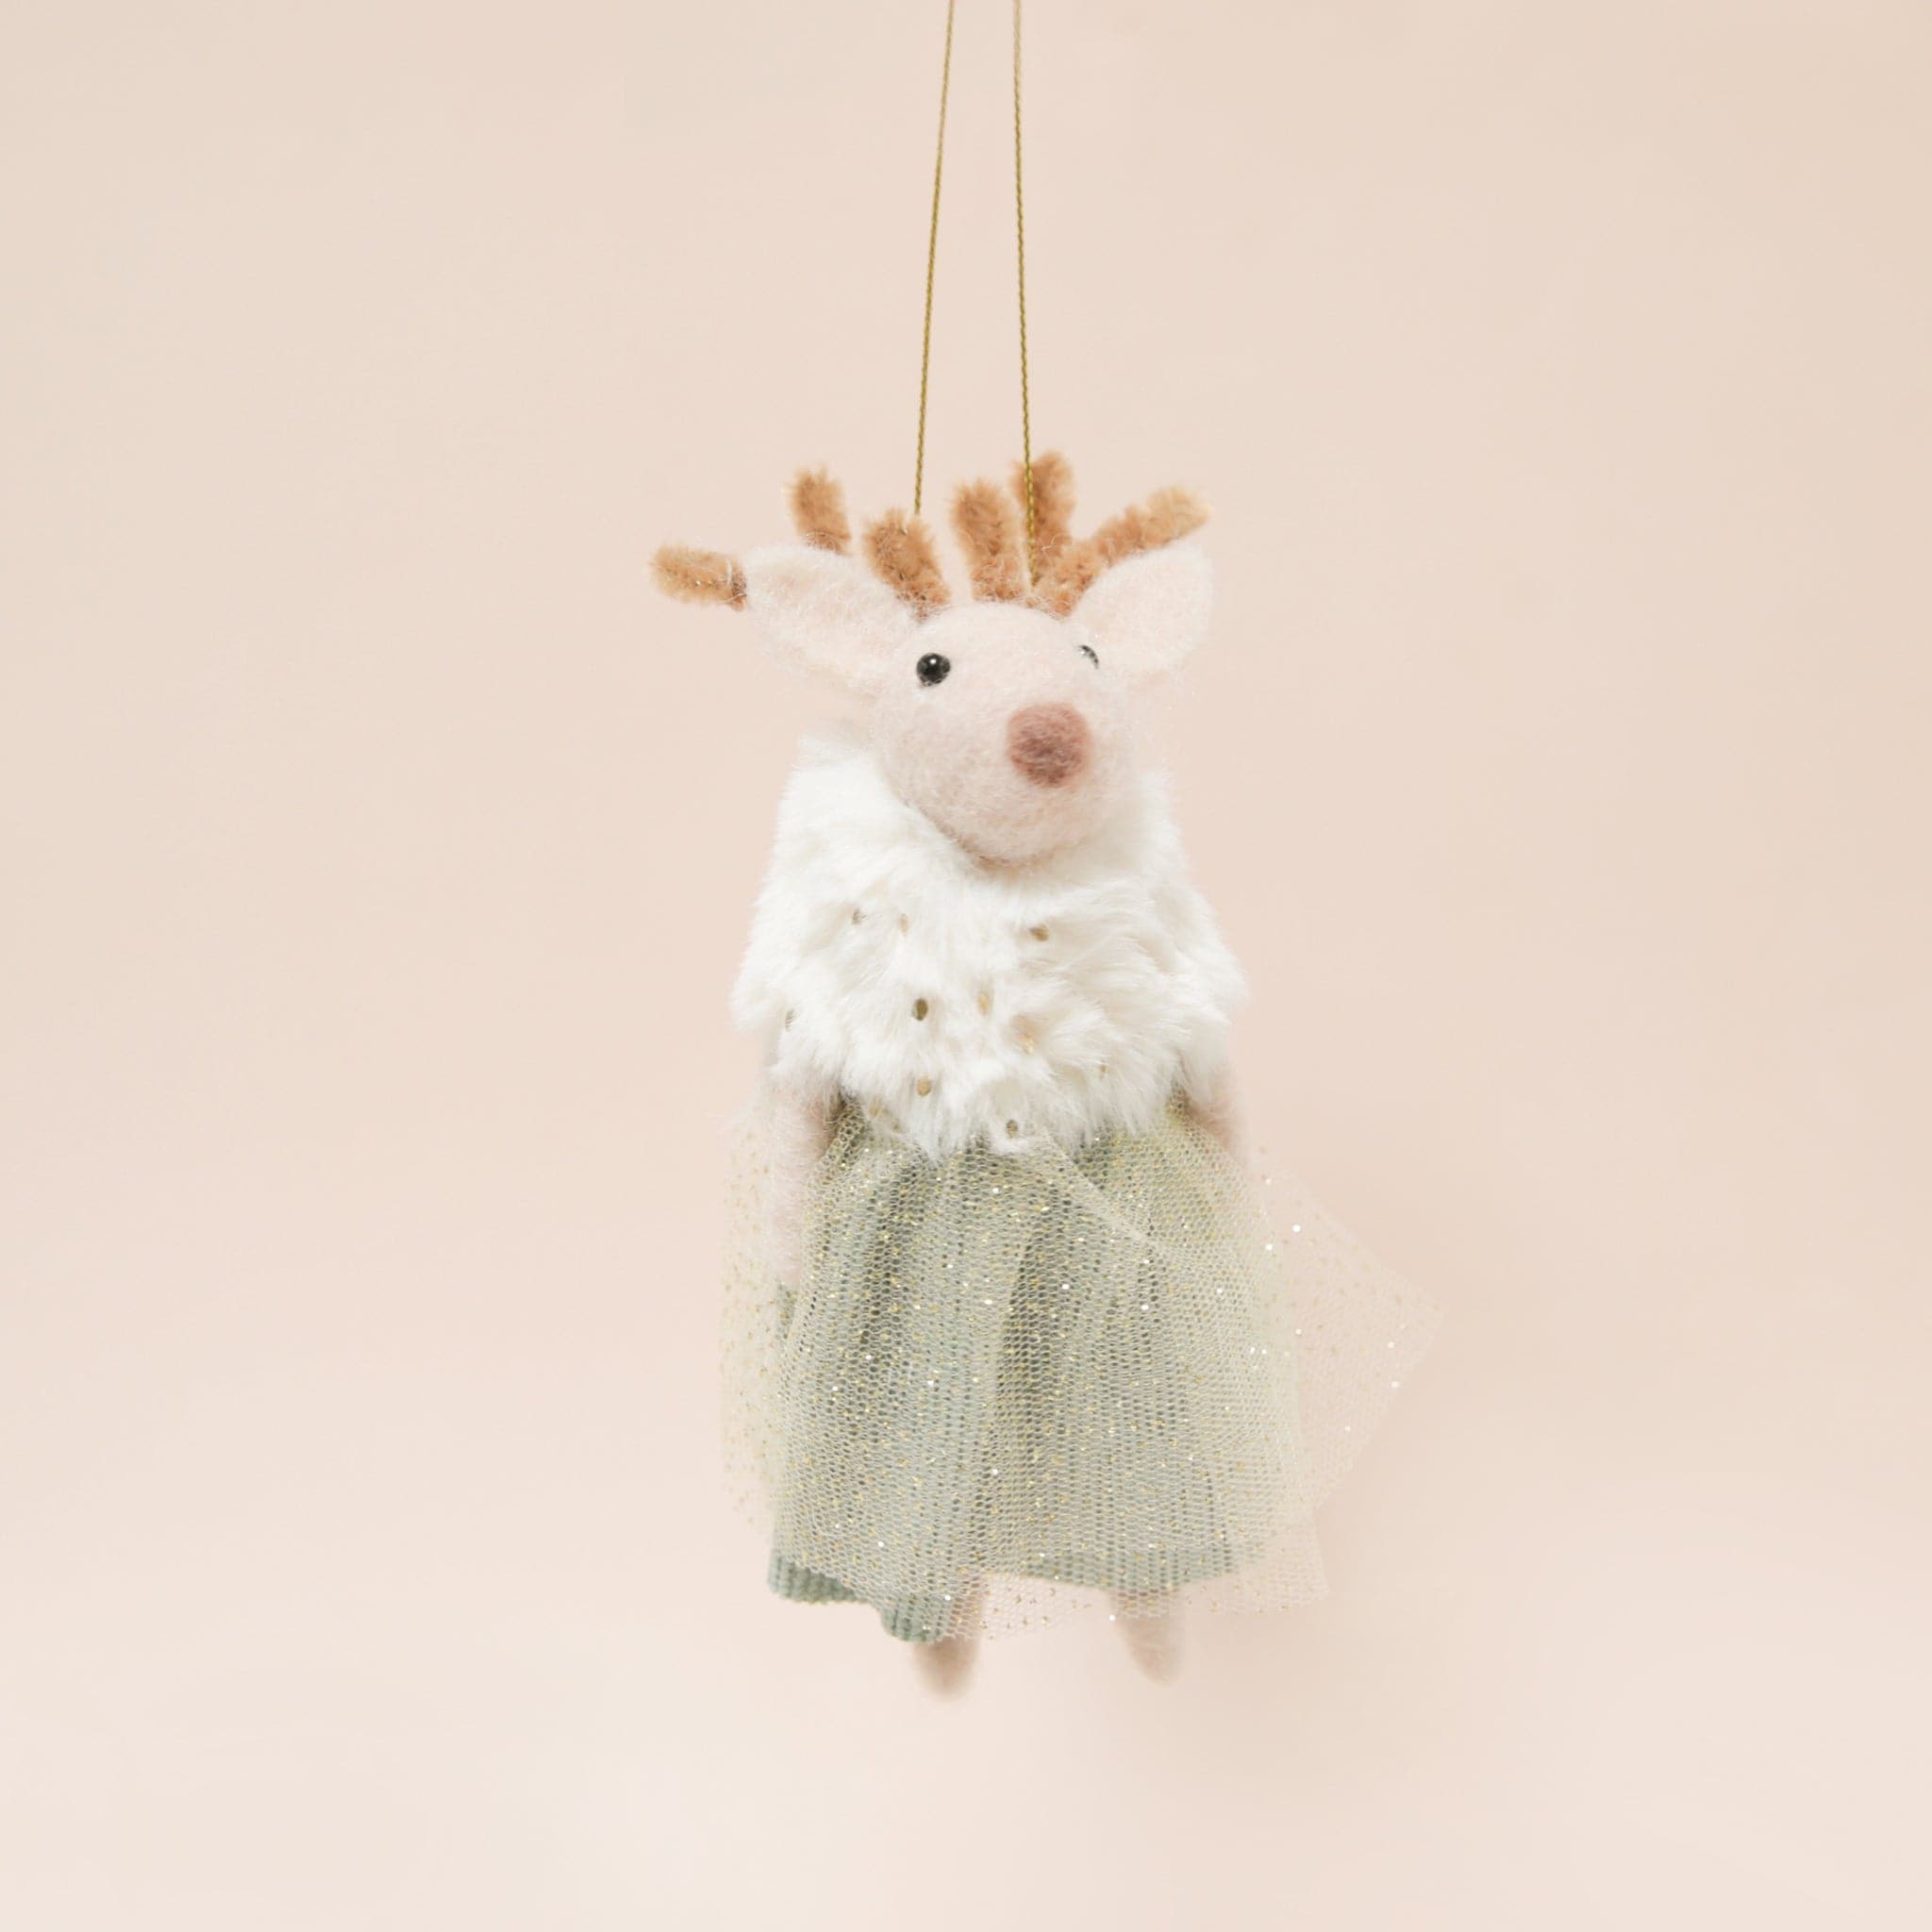 Against a peachy background is a felted deer ornament in a faux fur shall and a green tulle dress.